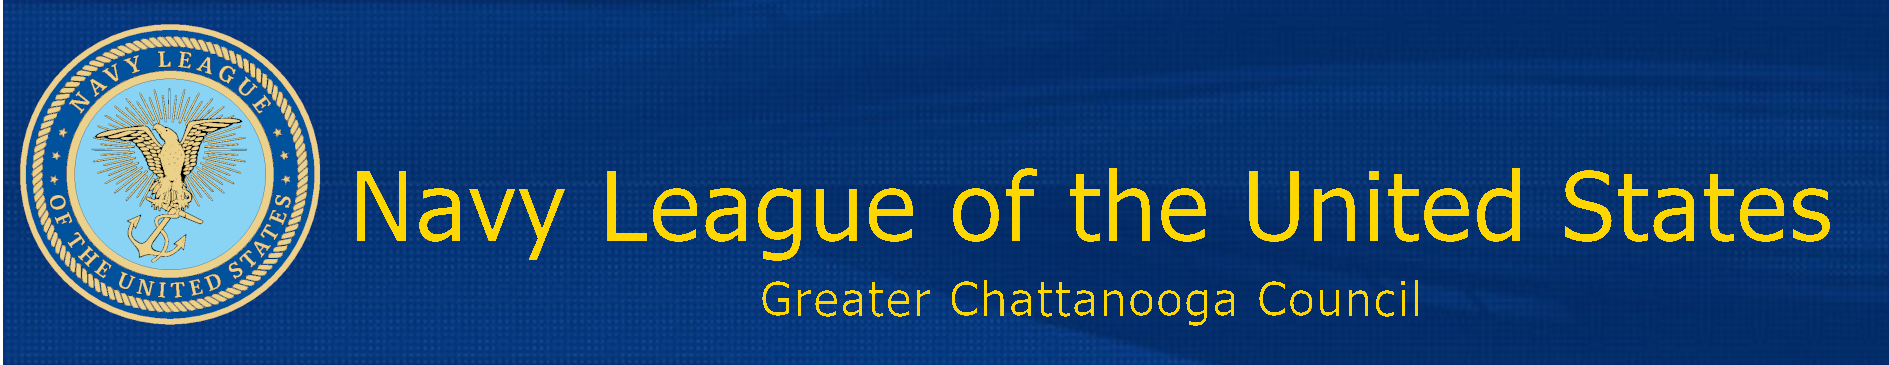 Navy League of the United States - Greater Chattanooga Council